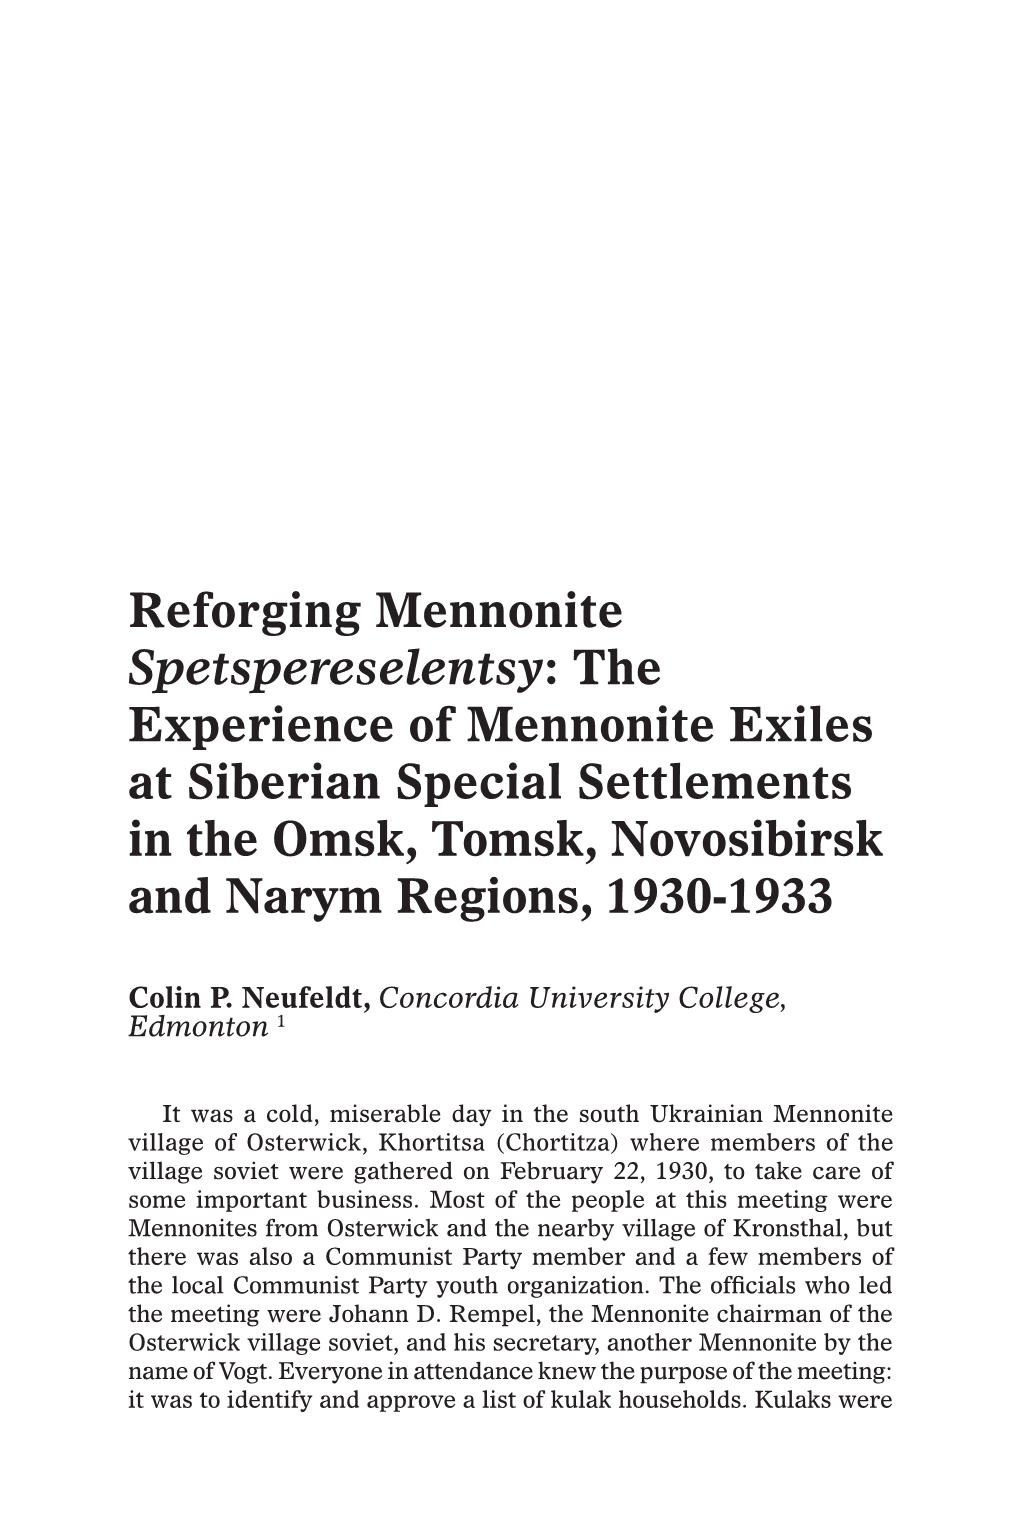 The Experience of Mennonite Exiles at Siberian Special Settlements in the Omsk, Tomsk, Novosibirsk and Narym Regions, 1930-1933